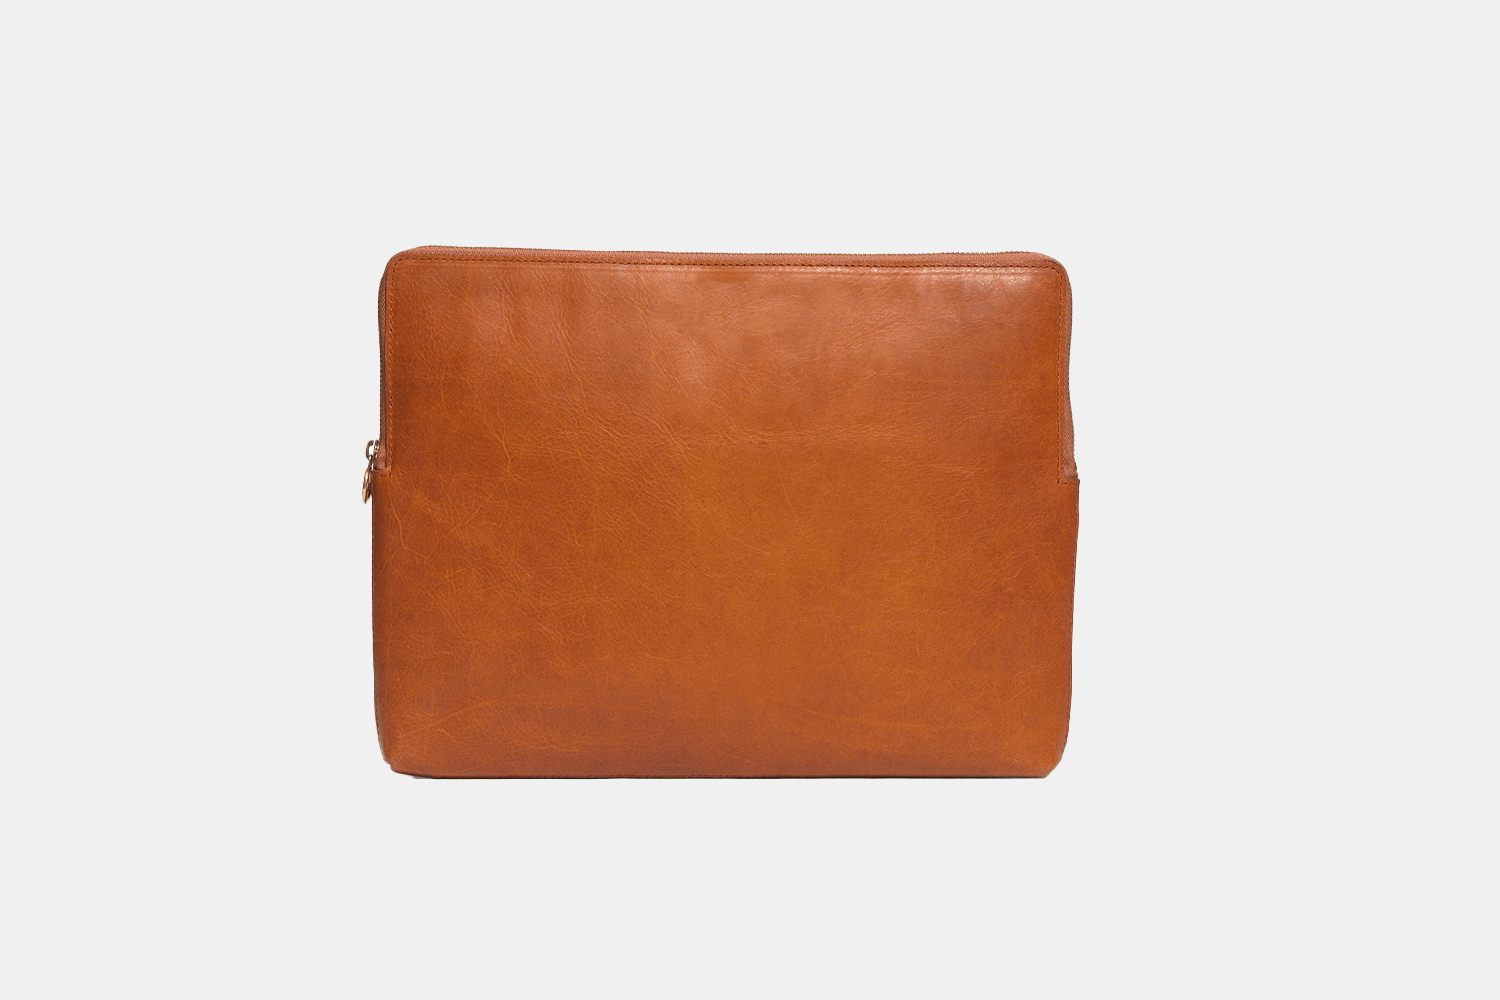 The Madewell Leather Laptop Case